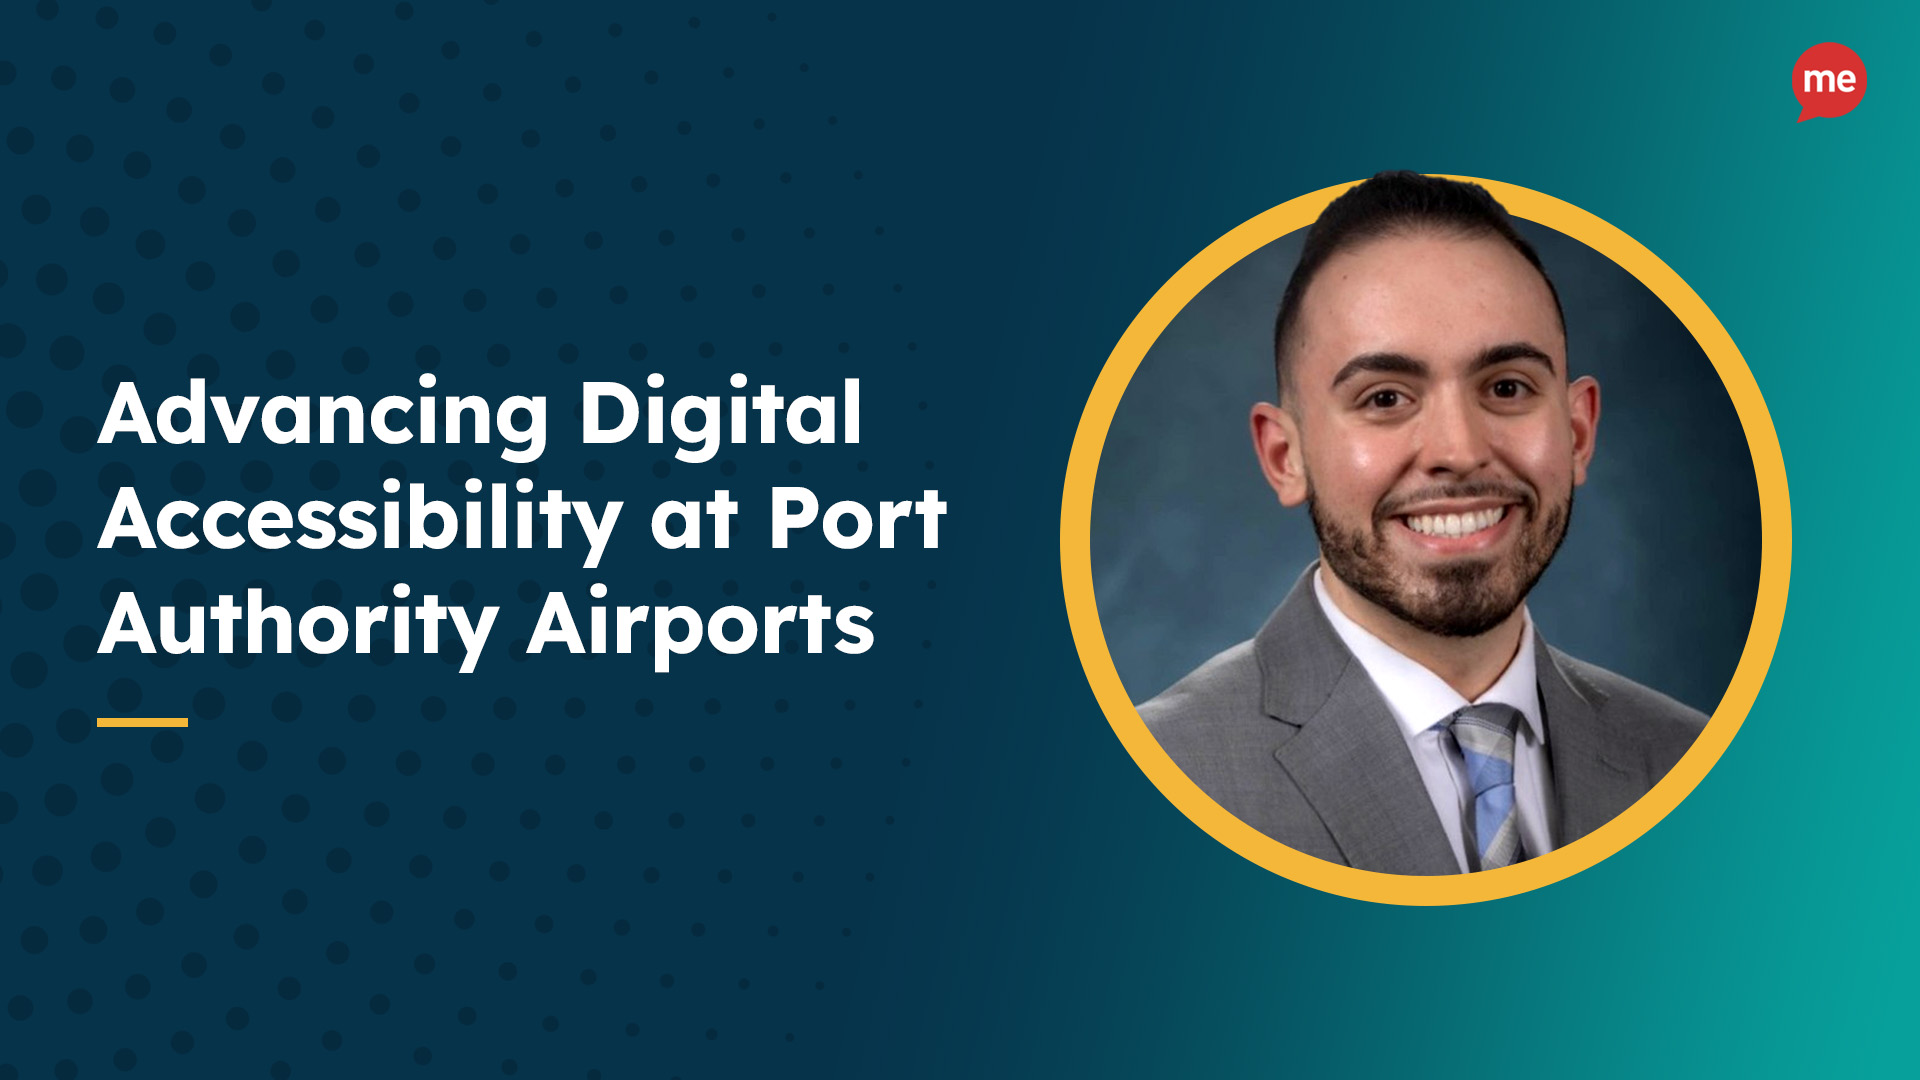 Thumbnail image with a headshot of William DeFeis, Program Manager, Aviation CX & ADA/Title VI Coordinator, Port Authority of New York and New Jersey